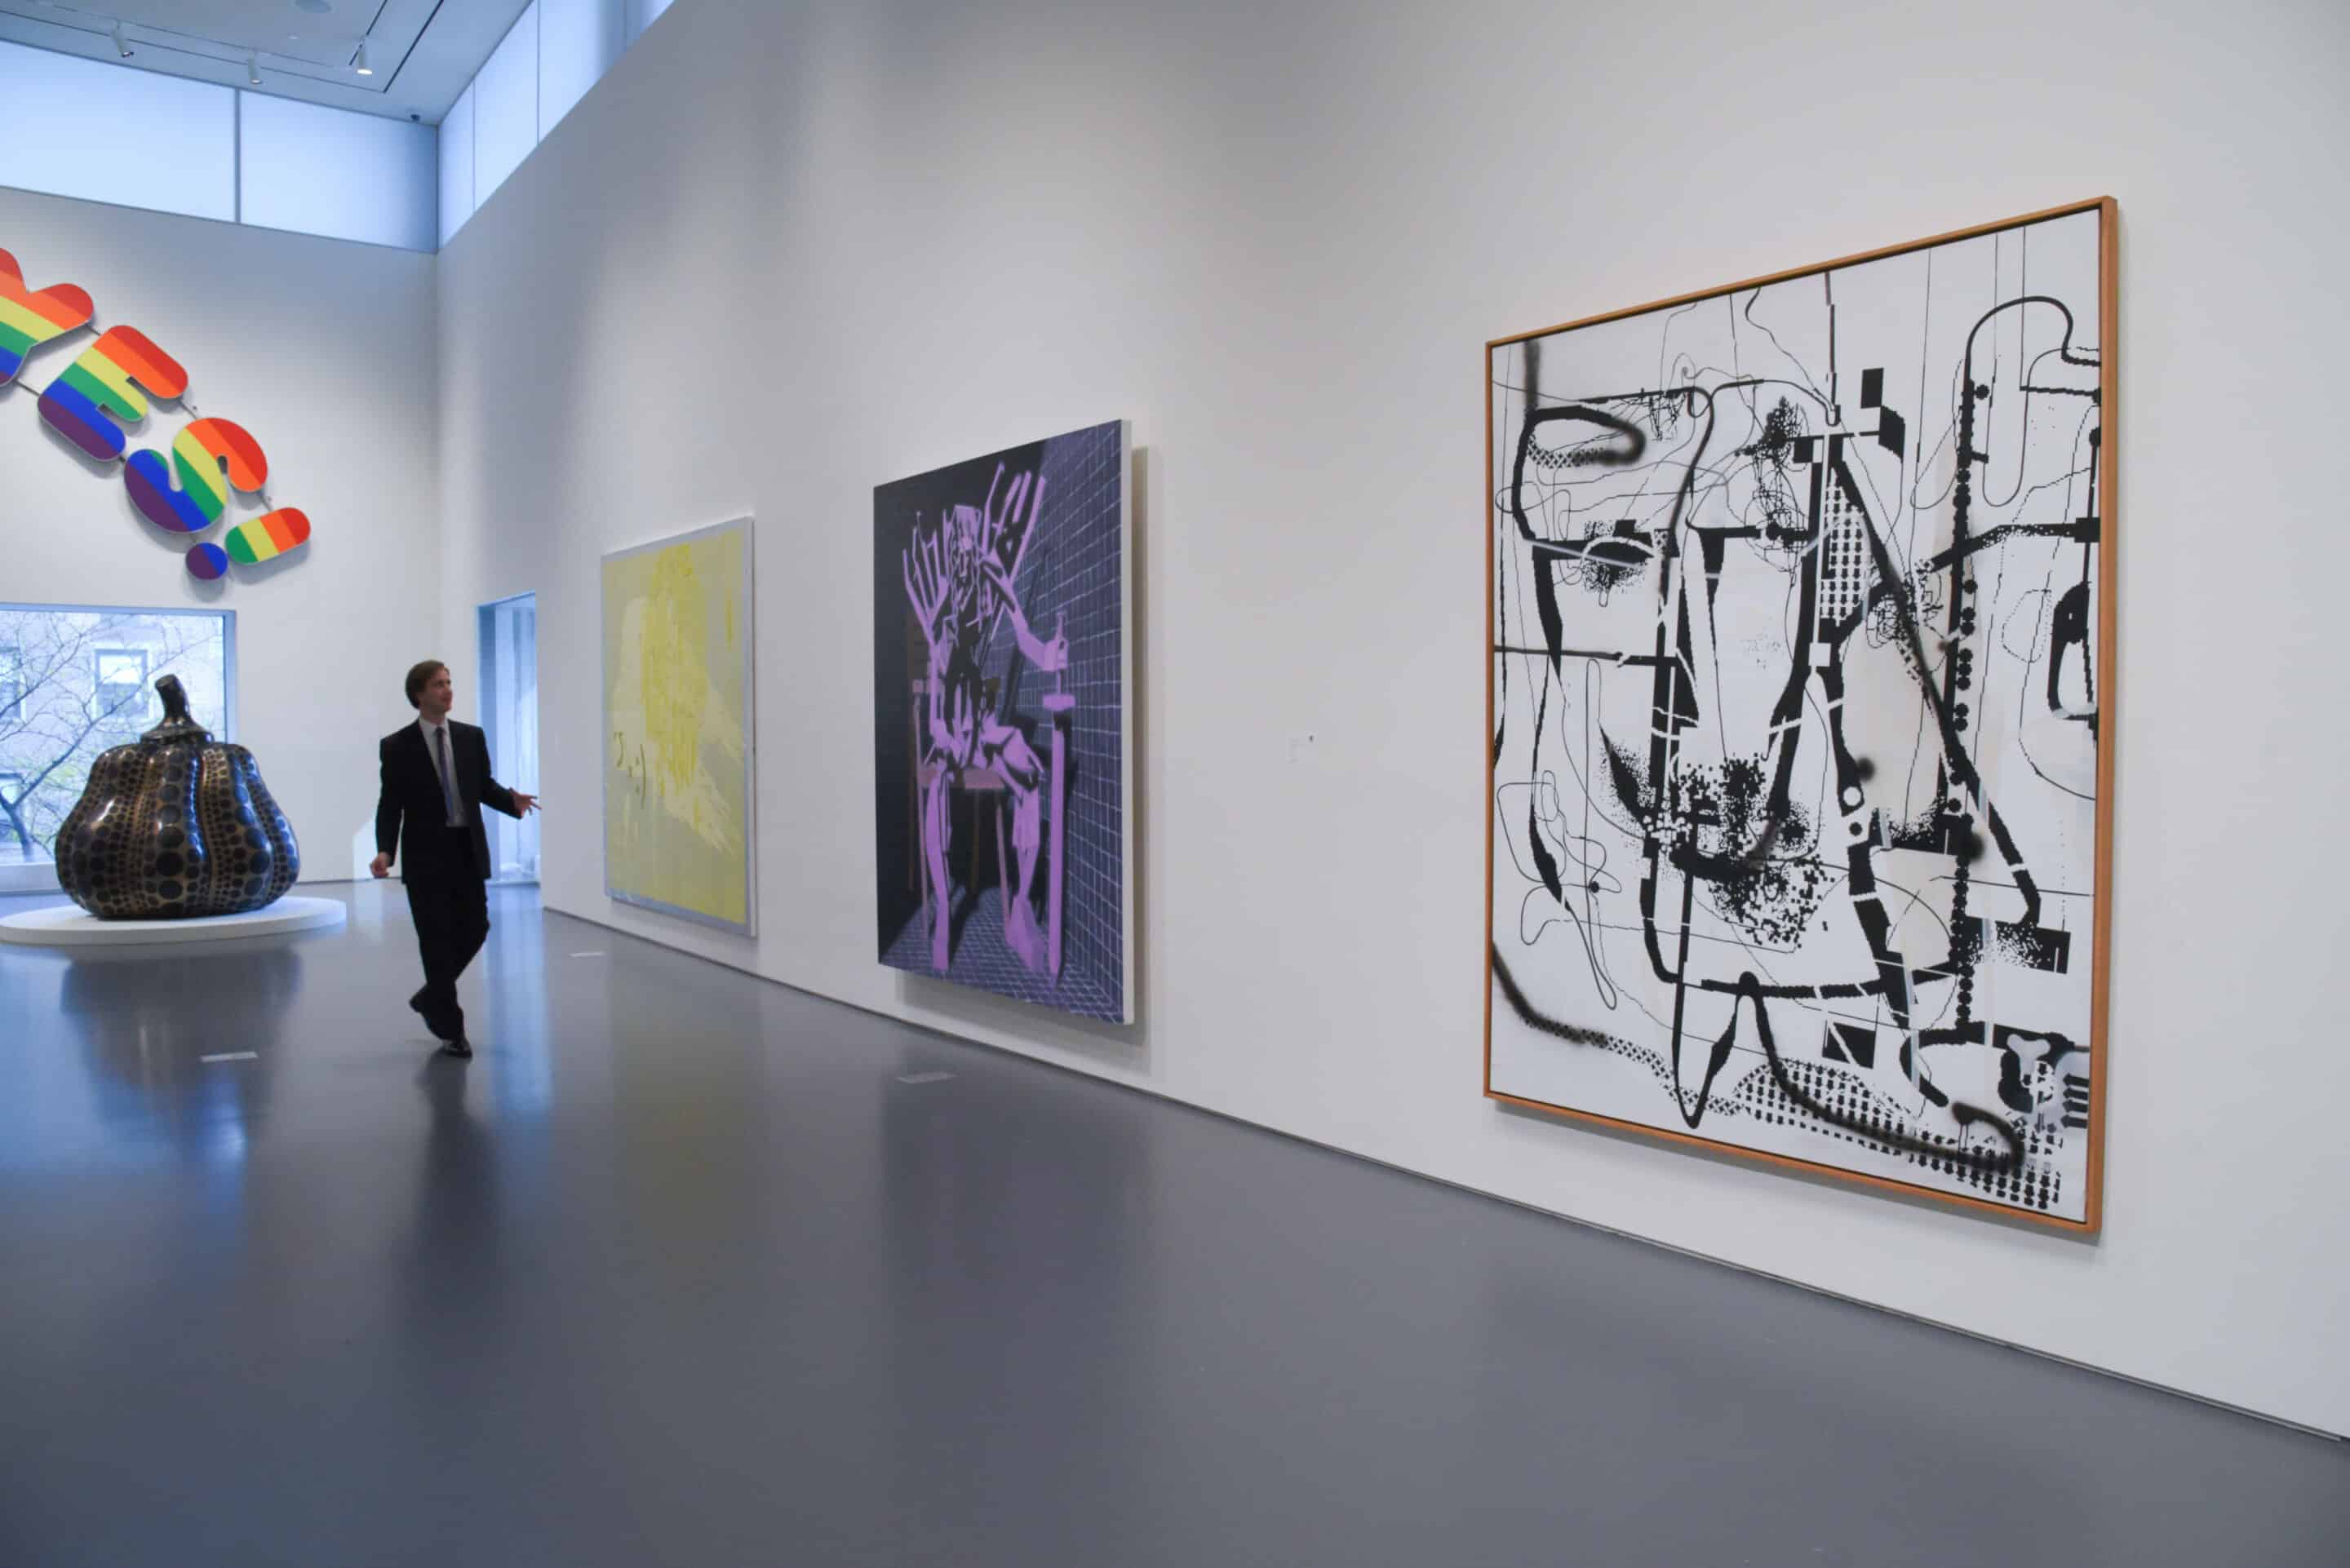 (Left) ?:), 2017, by Jacqueline Humphries, estimated $300-400 thousand, (center) Kundry, 2018, by Avery Singer estimated $1.8-2.5 Million and (right) Untitled, 1992/2004 by Albert Oehlen, estimated 1.2-1.8 Million are previewed before auction at Sotheby's in New York, NY on November 4, 2022. (Photo? by Efren Landaos/Sipa USA)/42514325//2211041954